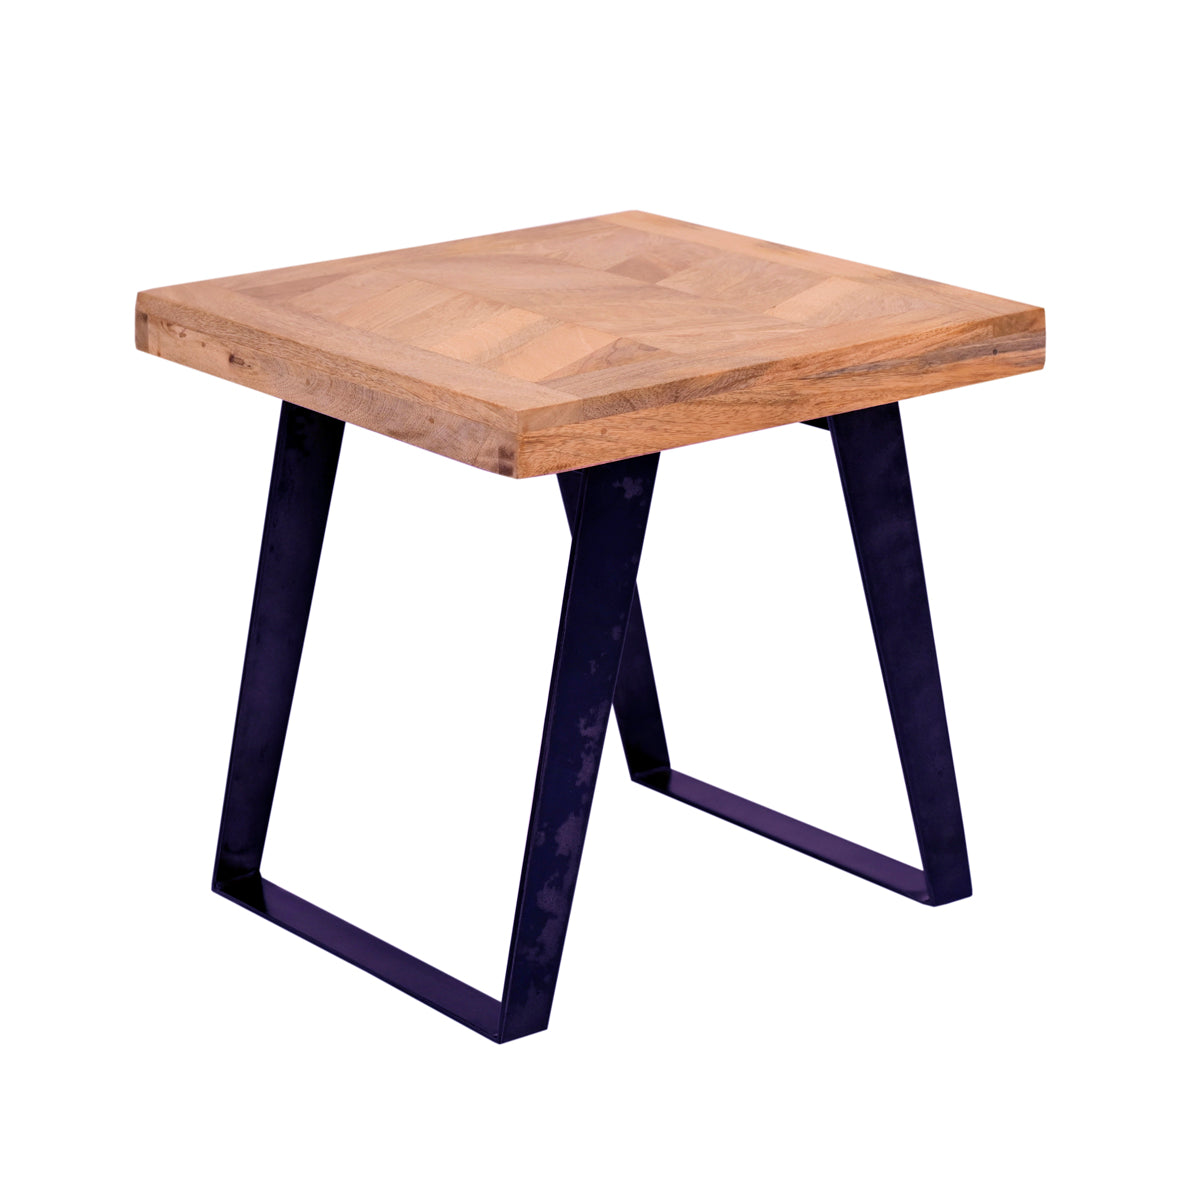 Agra Side Table with Parquet Detailing / Mango Wood